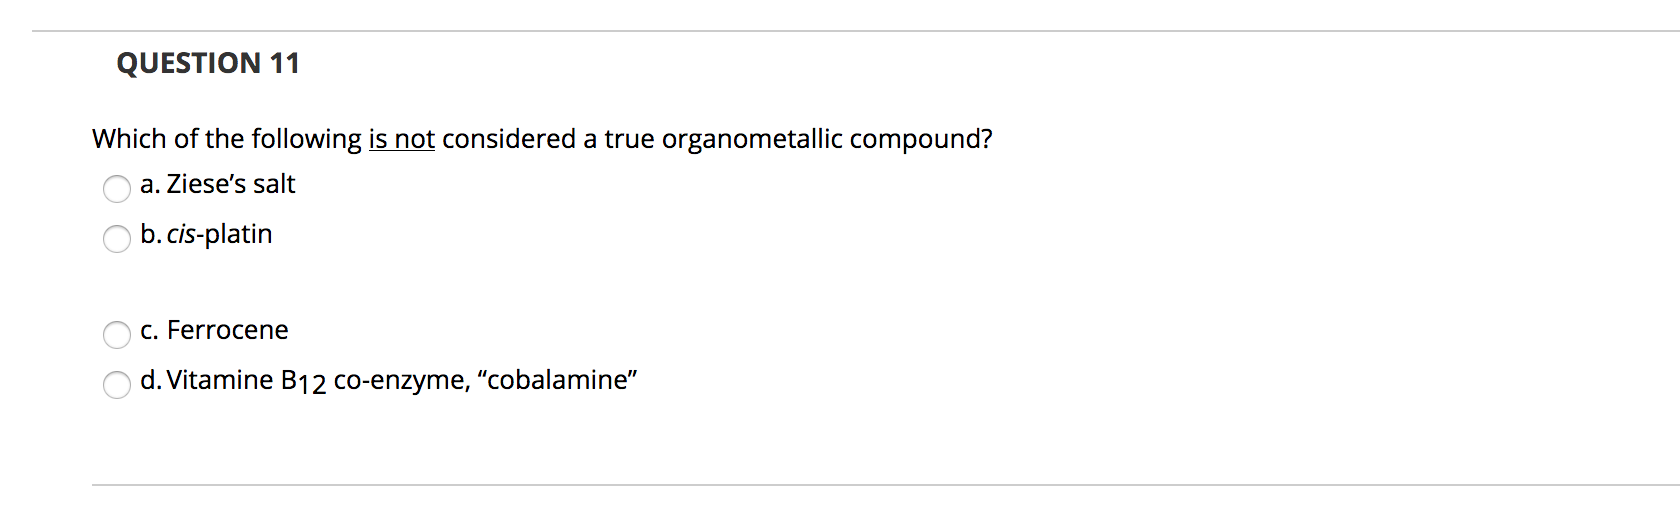 Which of the following is not considered a true organometallic compound?
a. Ziese's salt
b.cis-platin
c. Ferrocene
d. Vitamine B12 co-enzyme, "cobalamine"
